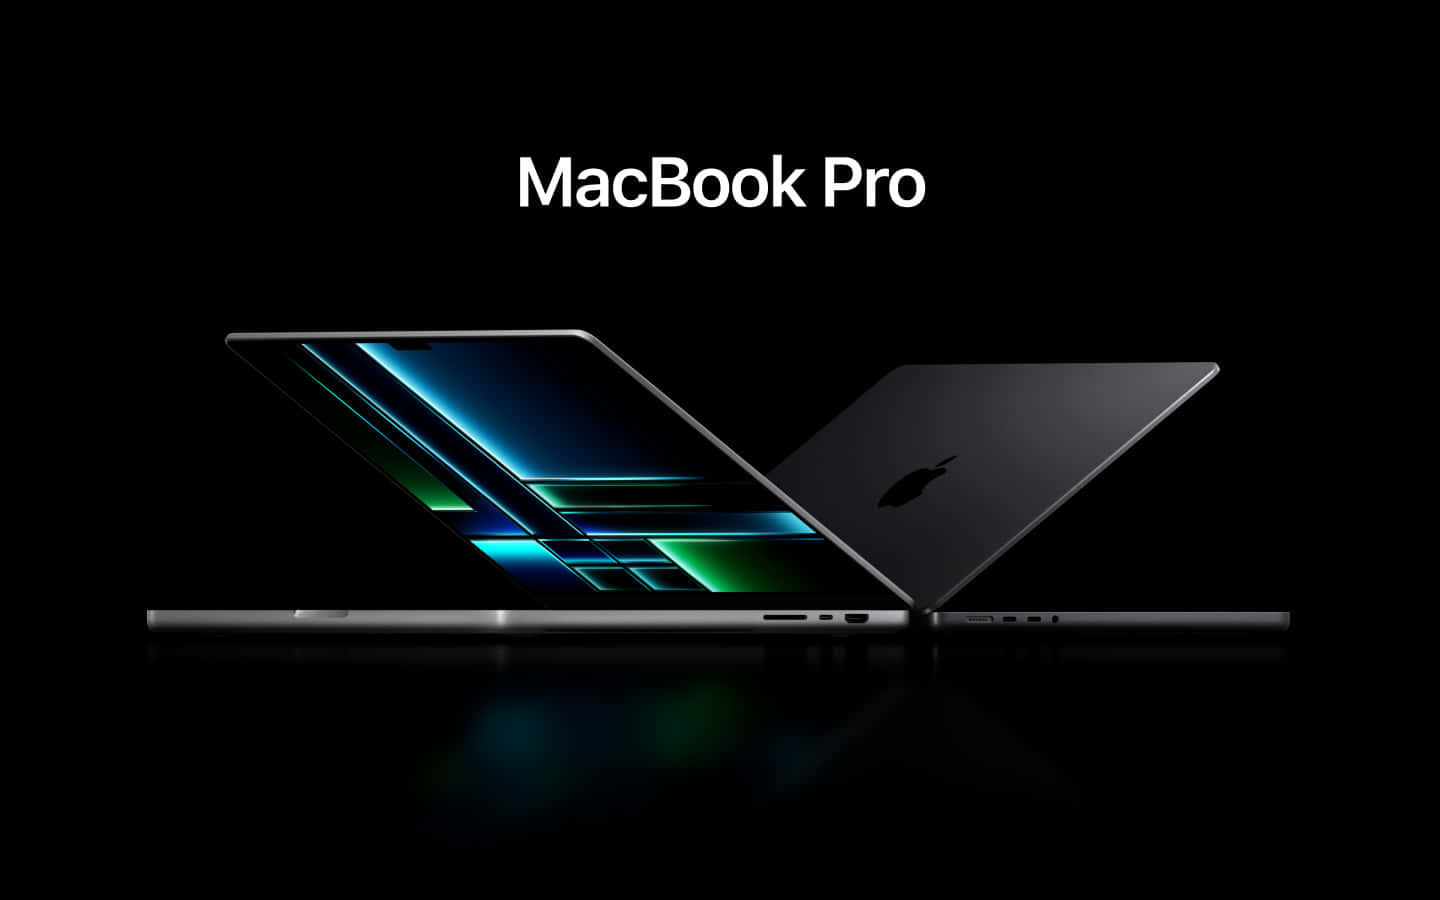 Enjoy the power and portability of the Apple Macbook